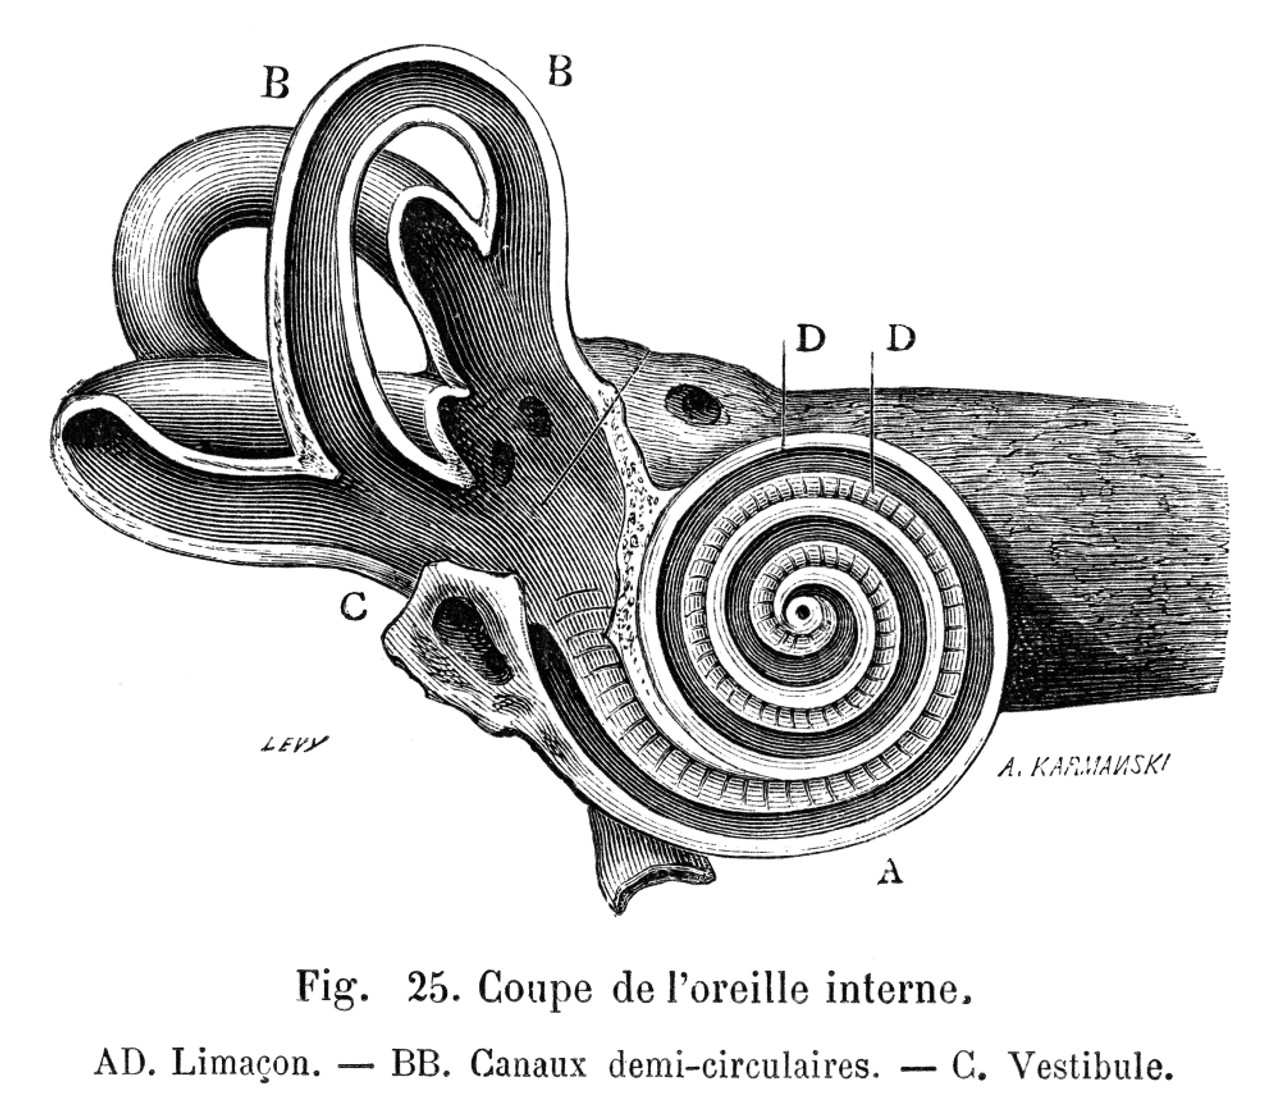 Diagram of the Ear